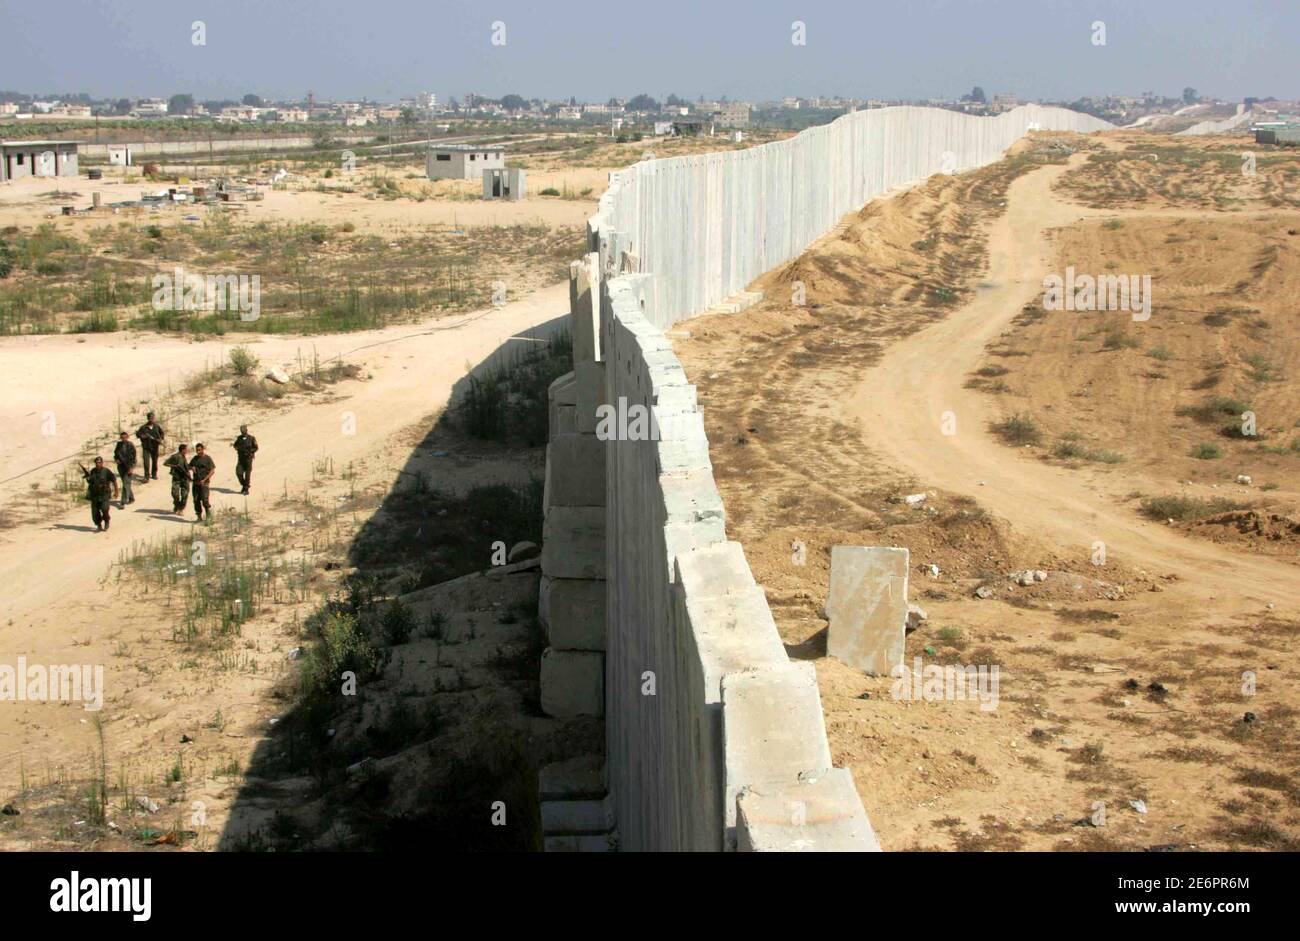 Members of the Palestinian national security forces loyal to Hamas deploy  along the border fence with Egypt in Rafah in the southern Gaza July, 25,  2007. Since Hamas' takeover, Gaza's main border